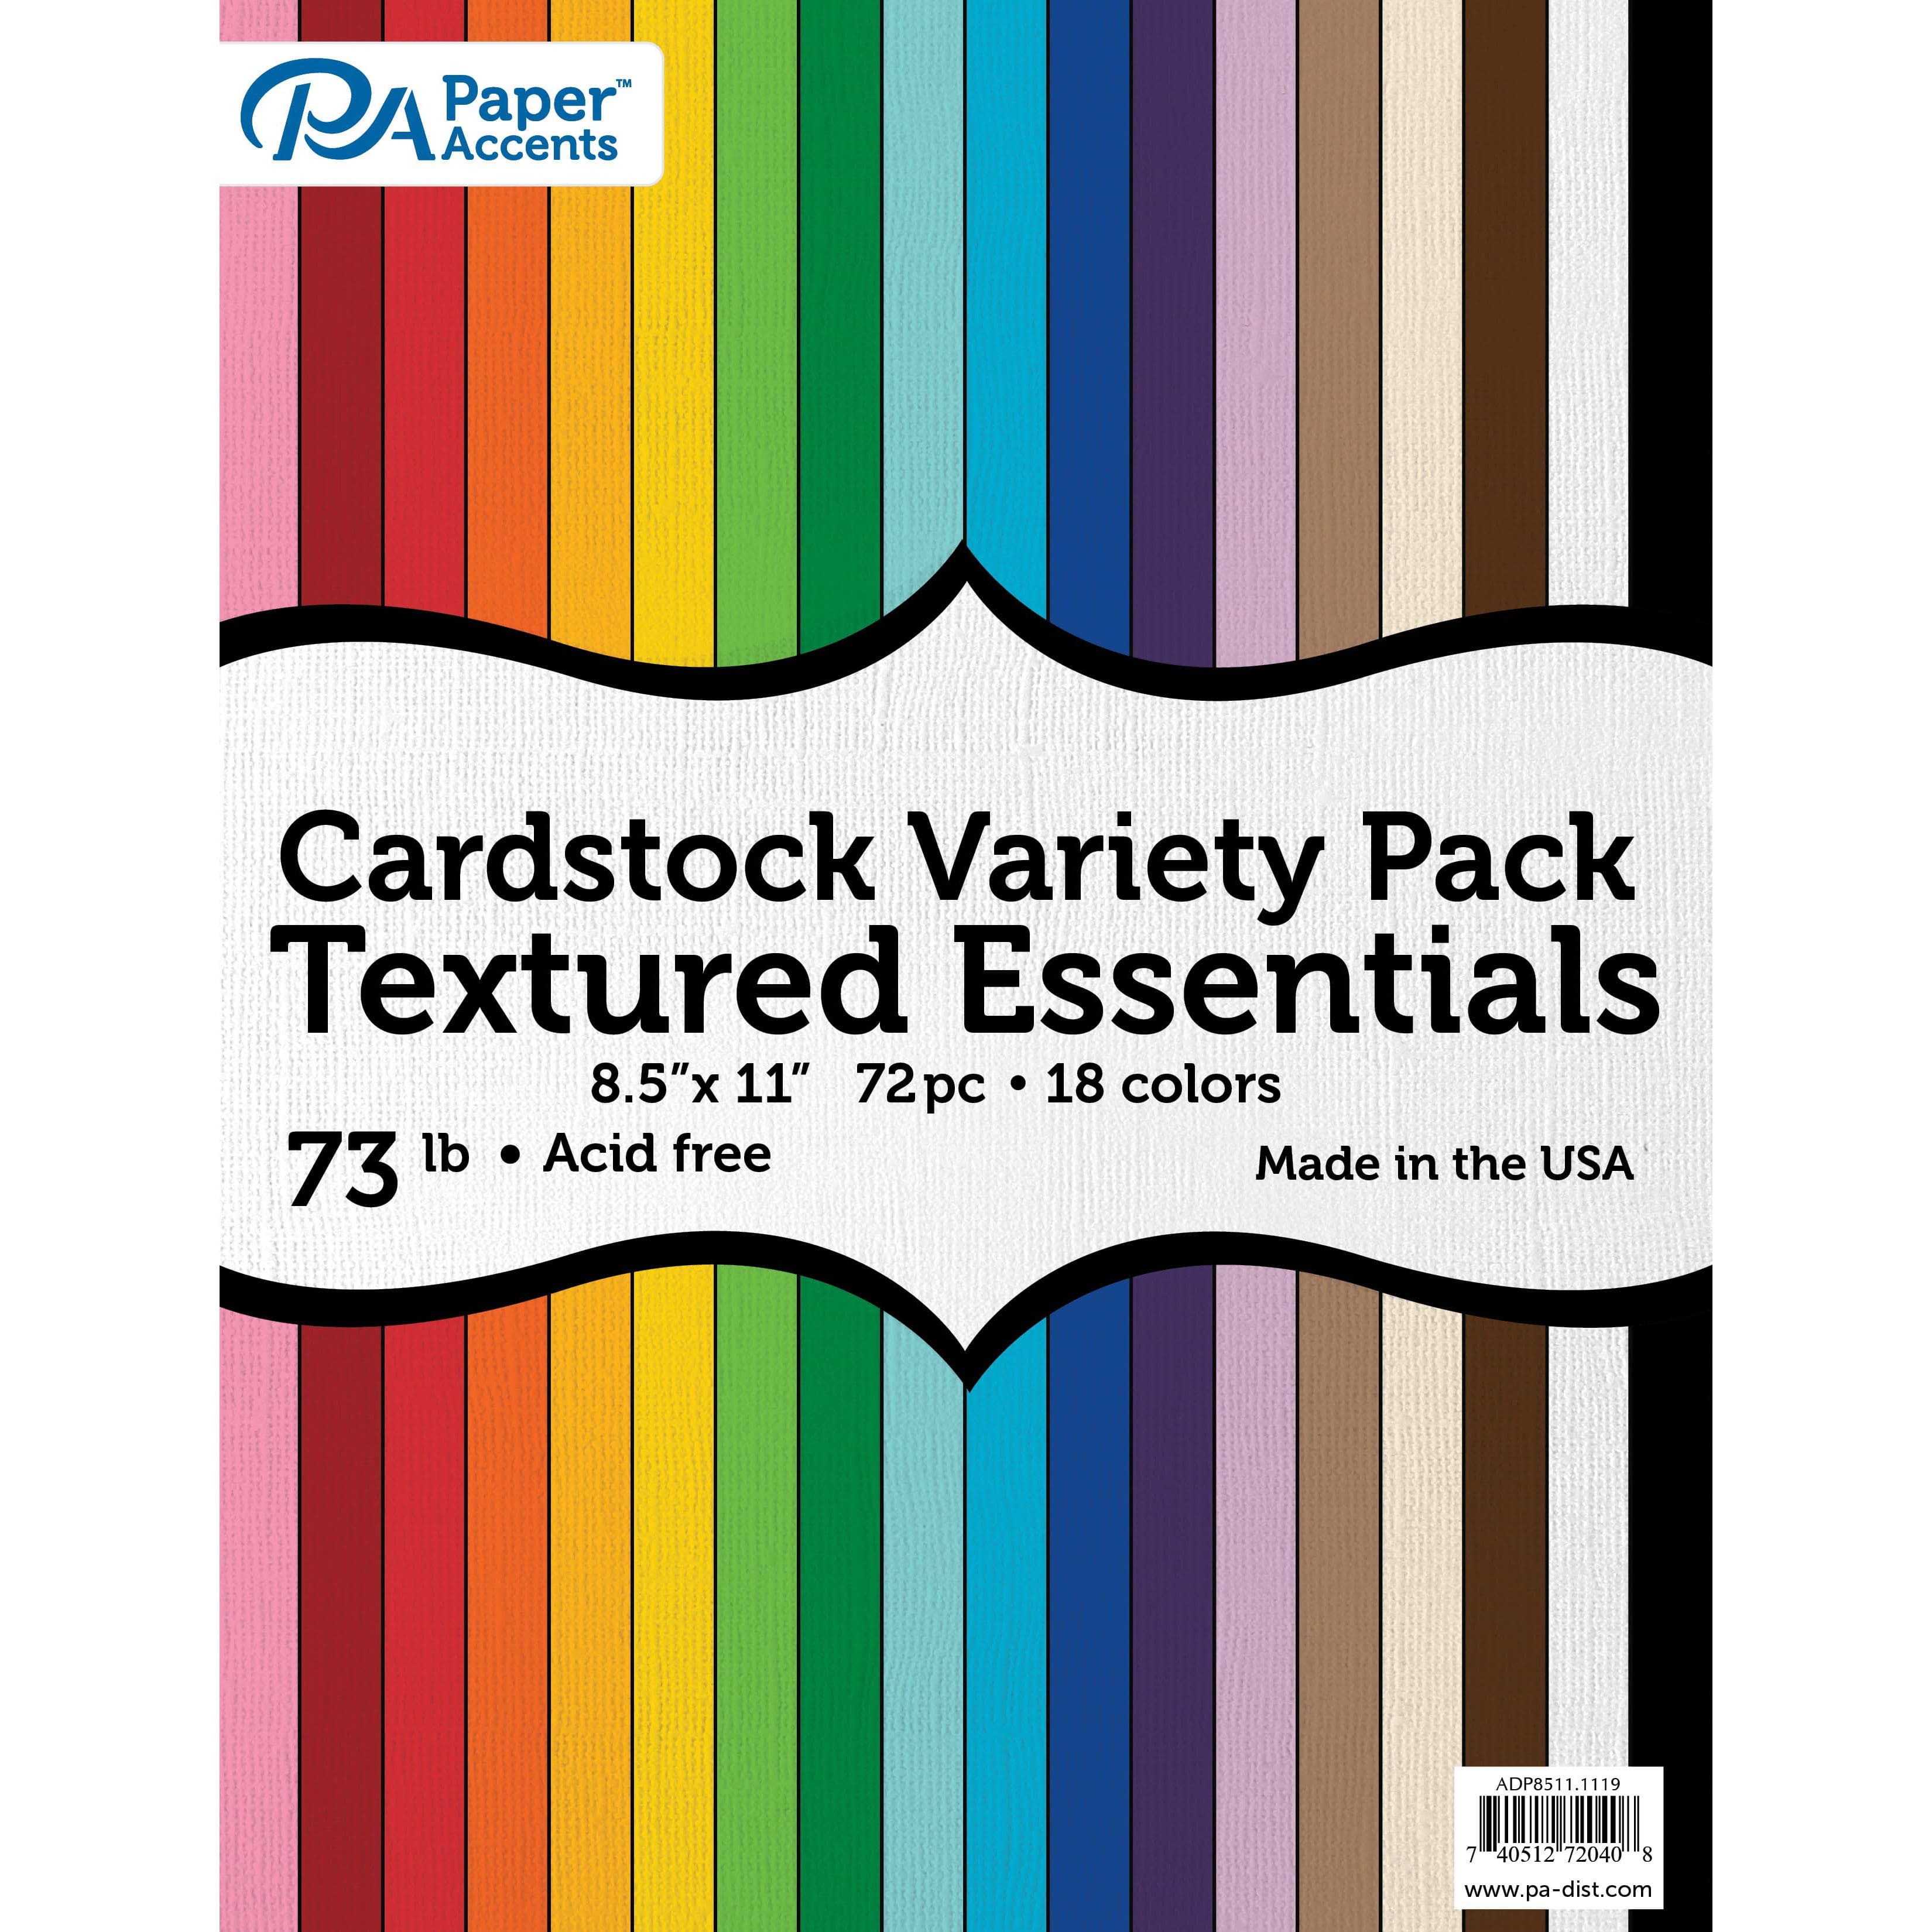 PA Paper™ Accents Textured Essentials 8.5